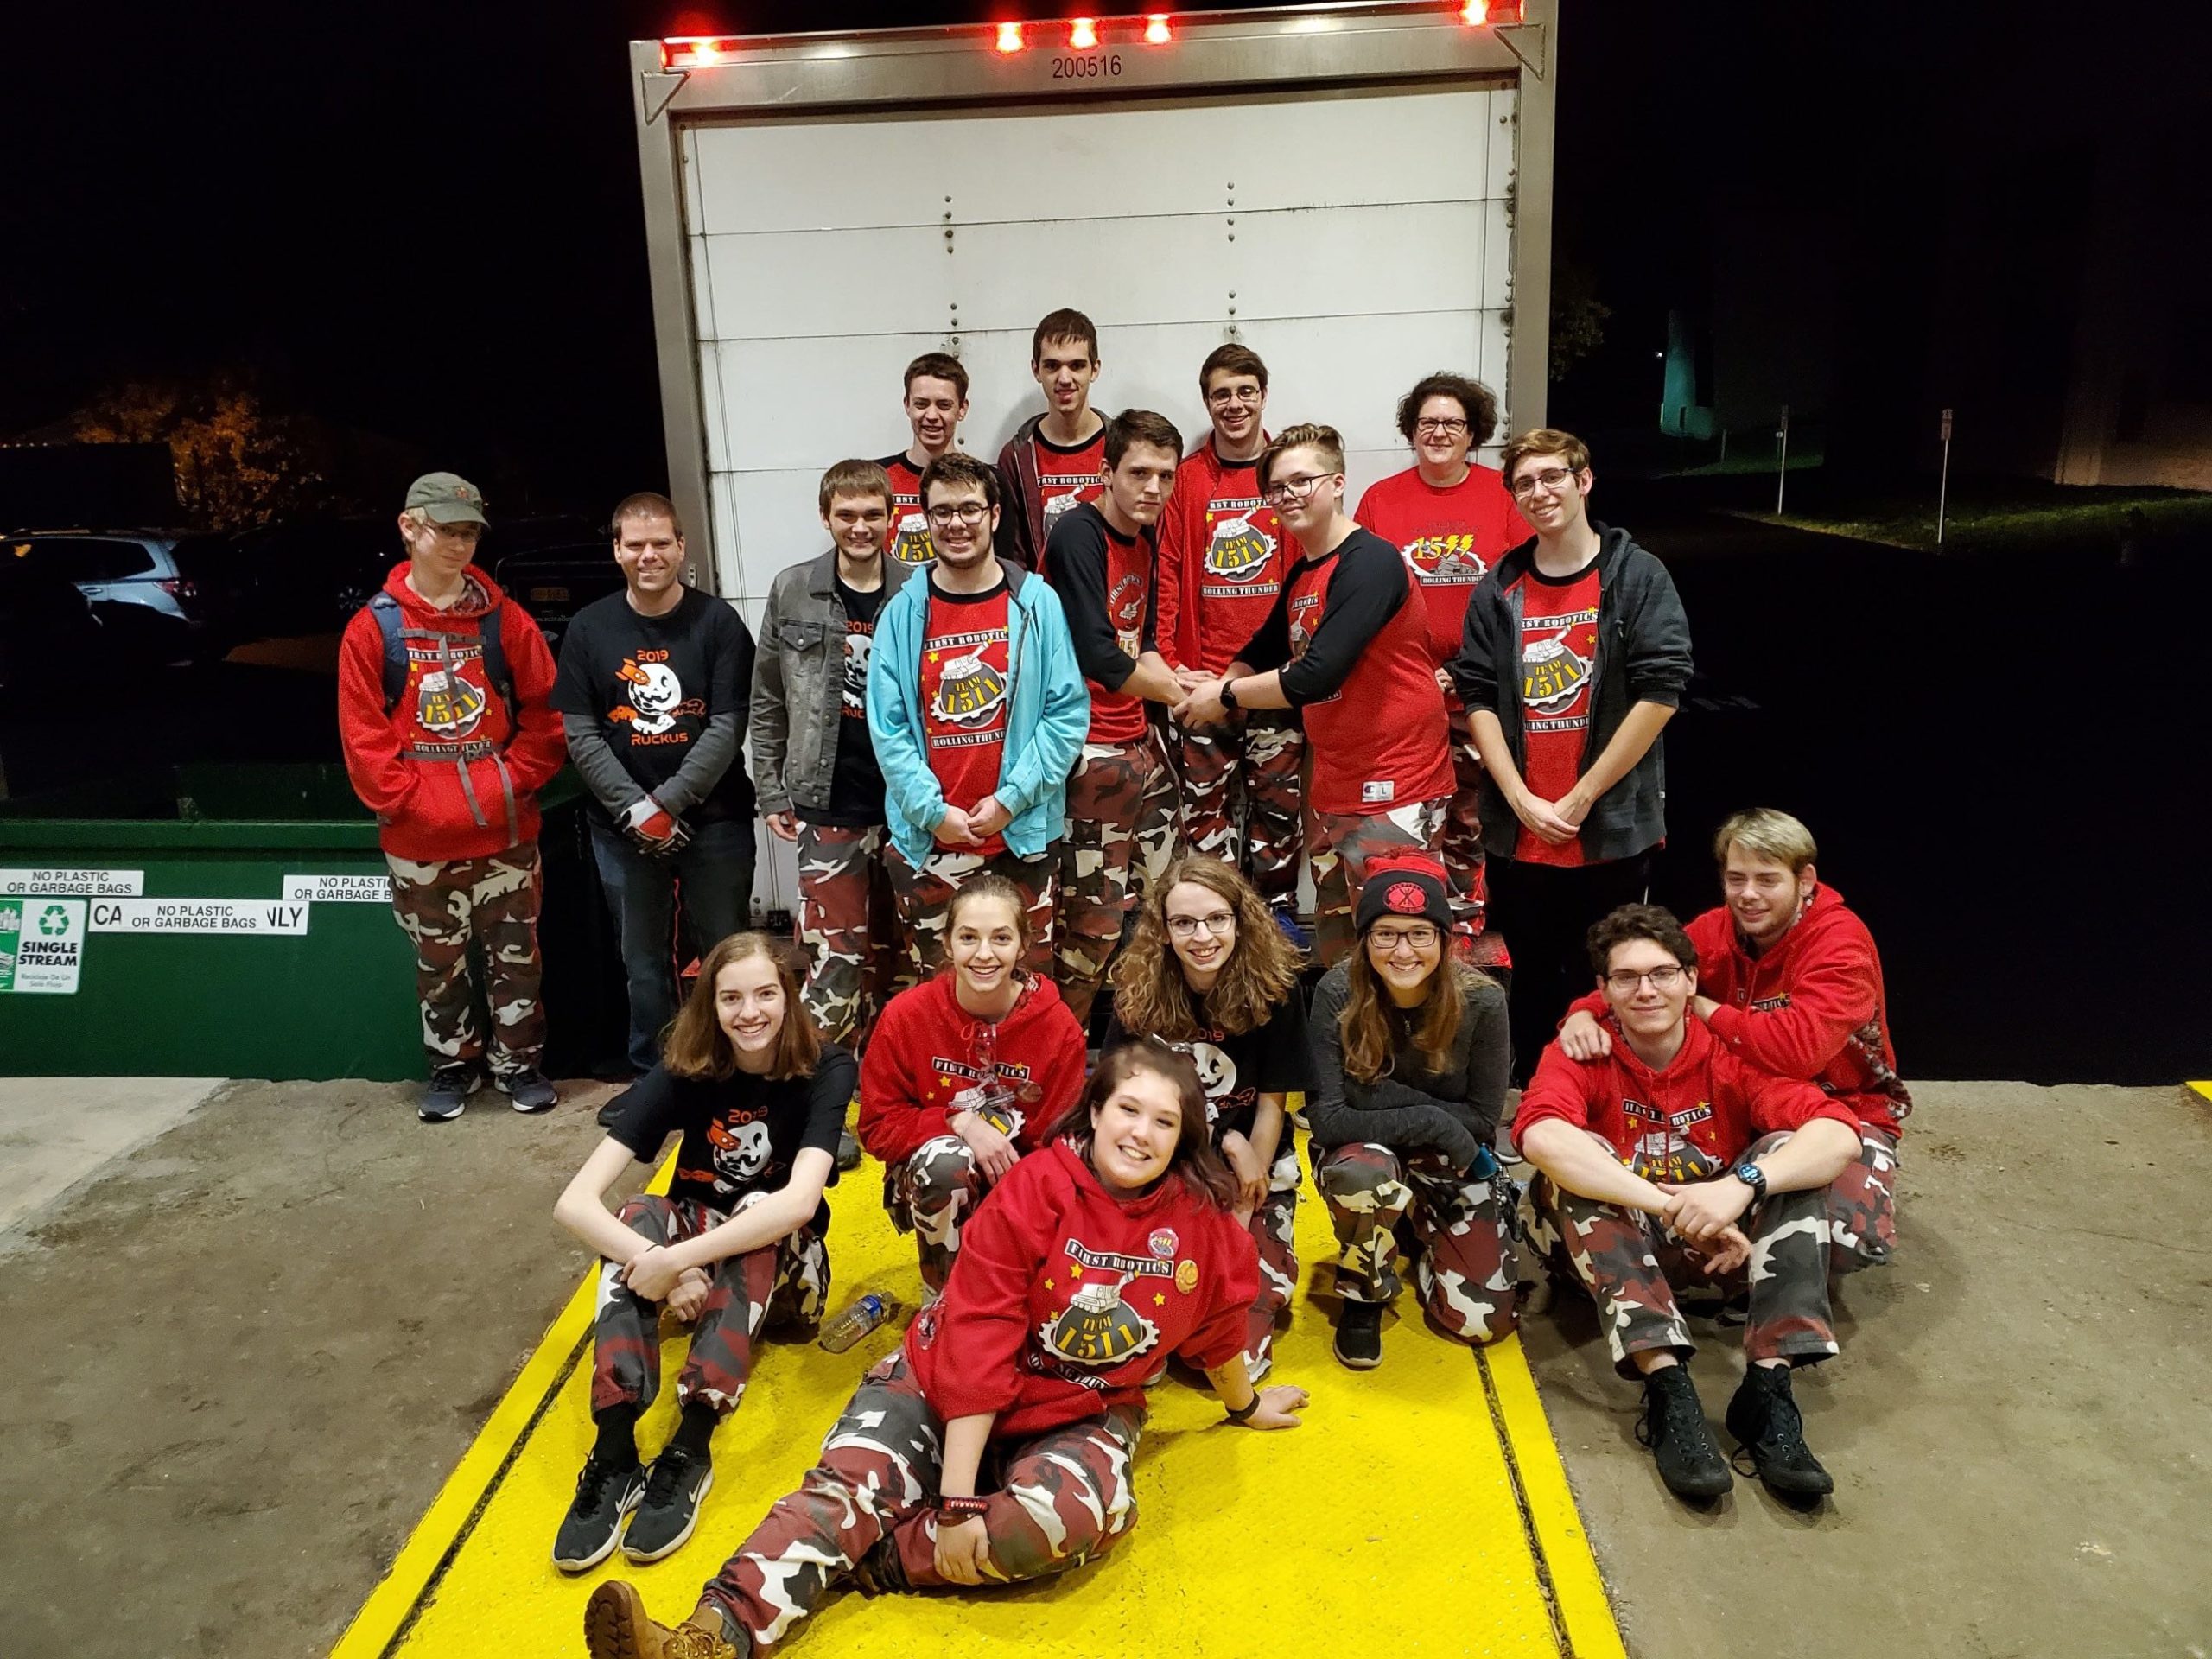 Photo of team members in uniforms at a loading dock in front of a U-Haul truck while unloading form Rah Cha Cha Cha Ruckus Event